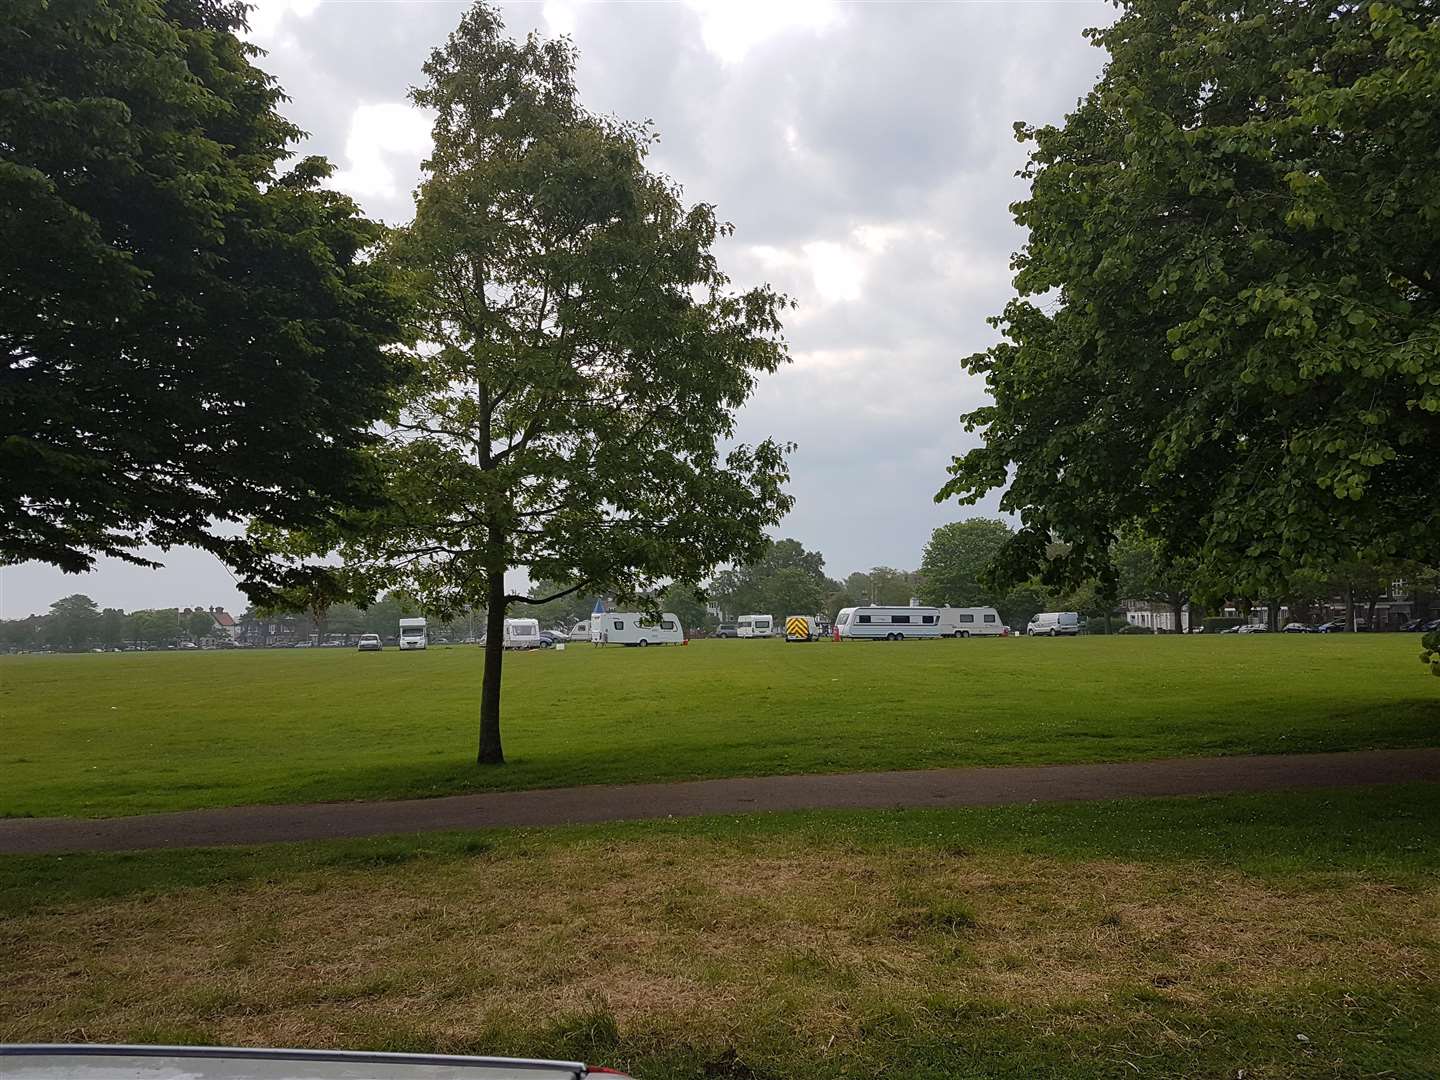 Travellers in Radnor Park